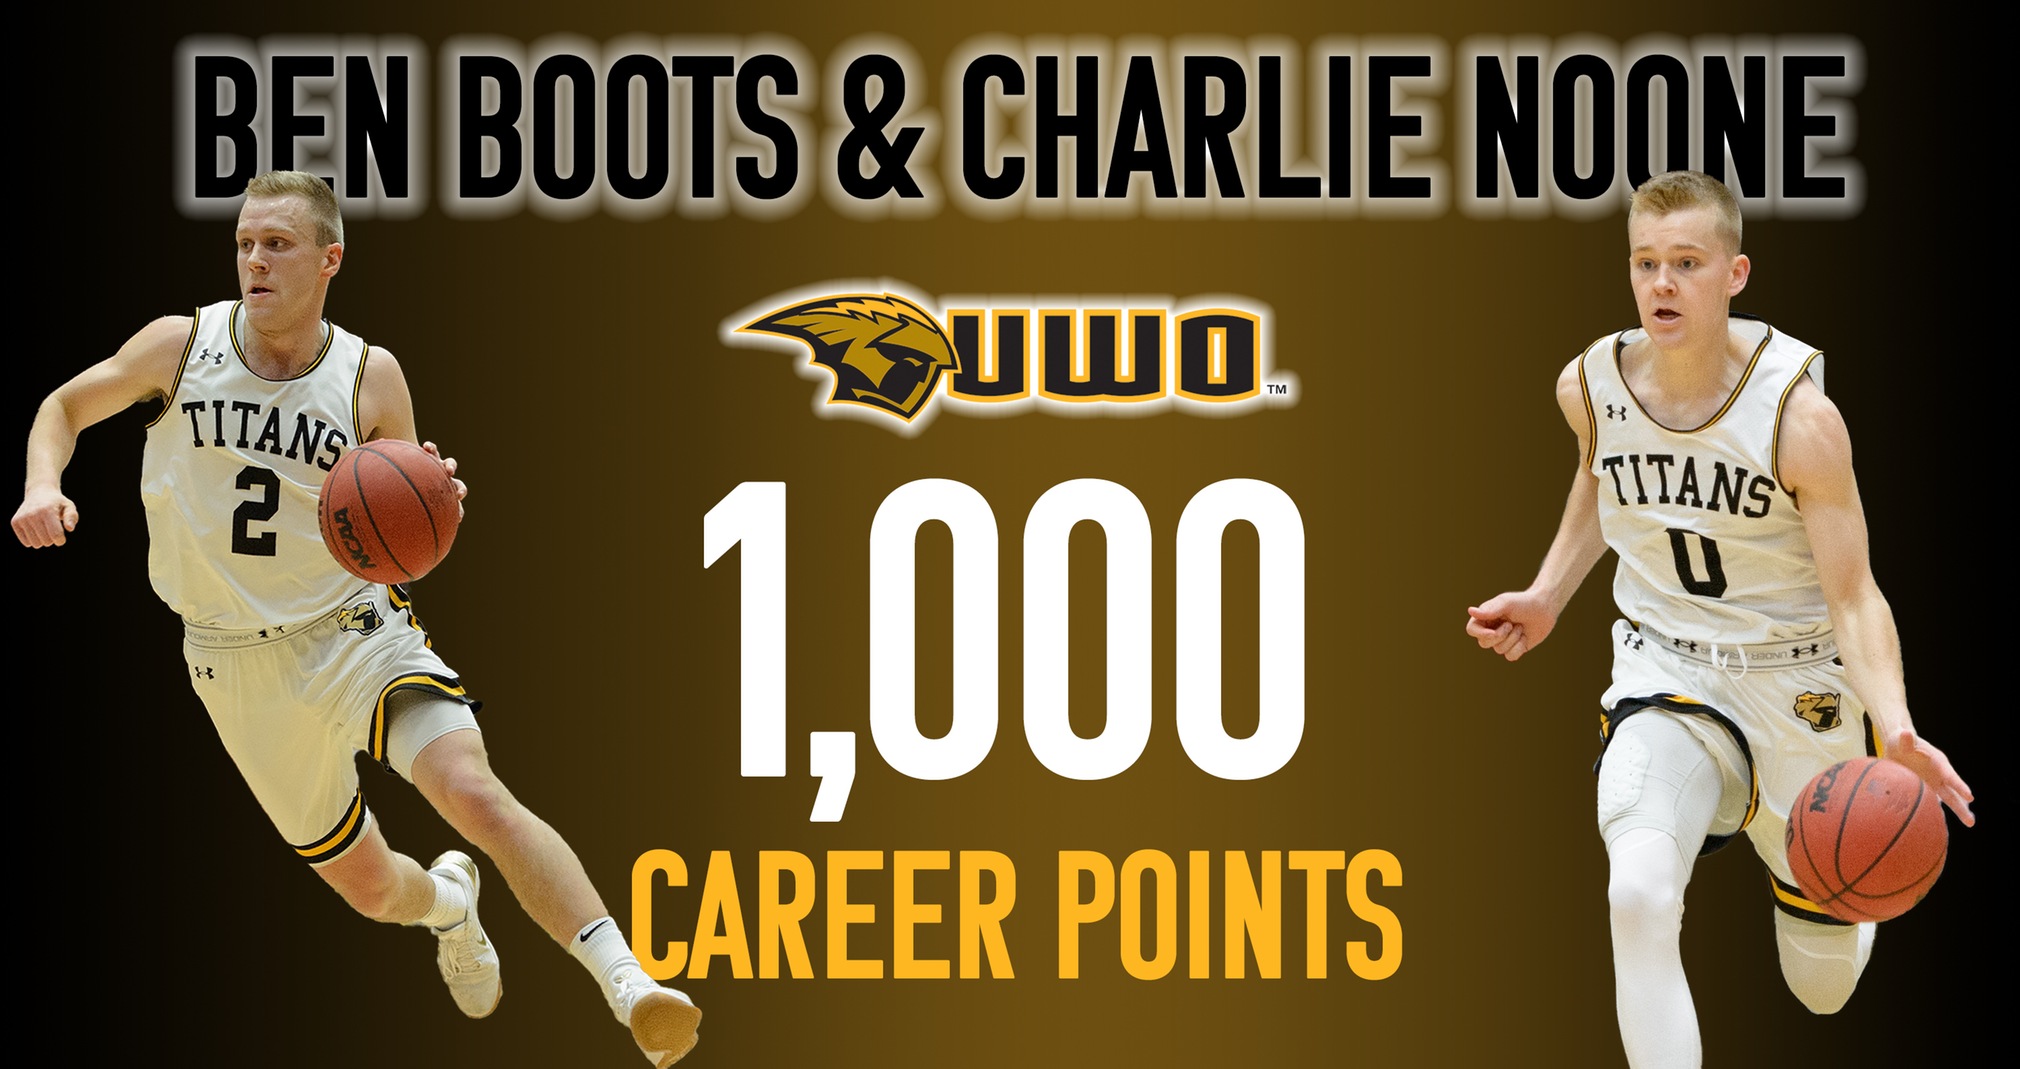 Charlie Noone became the 31st and Ben Boots the 32nd UW-Oshkosh player to reach 1,000 career points.